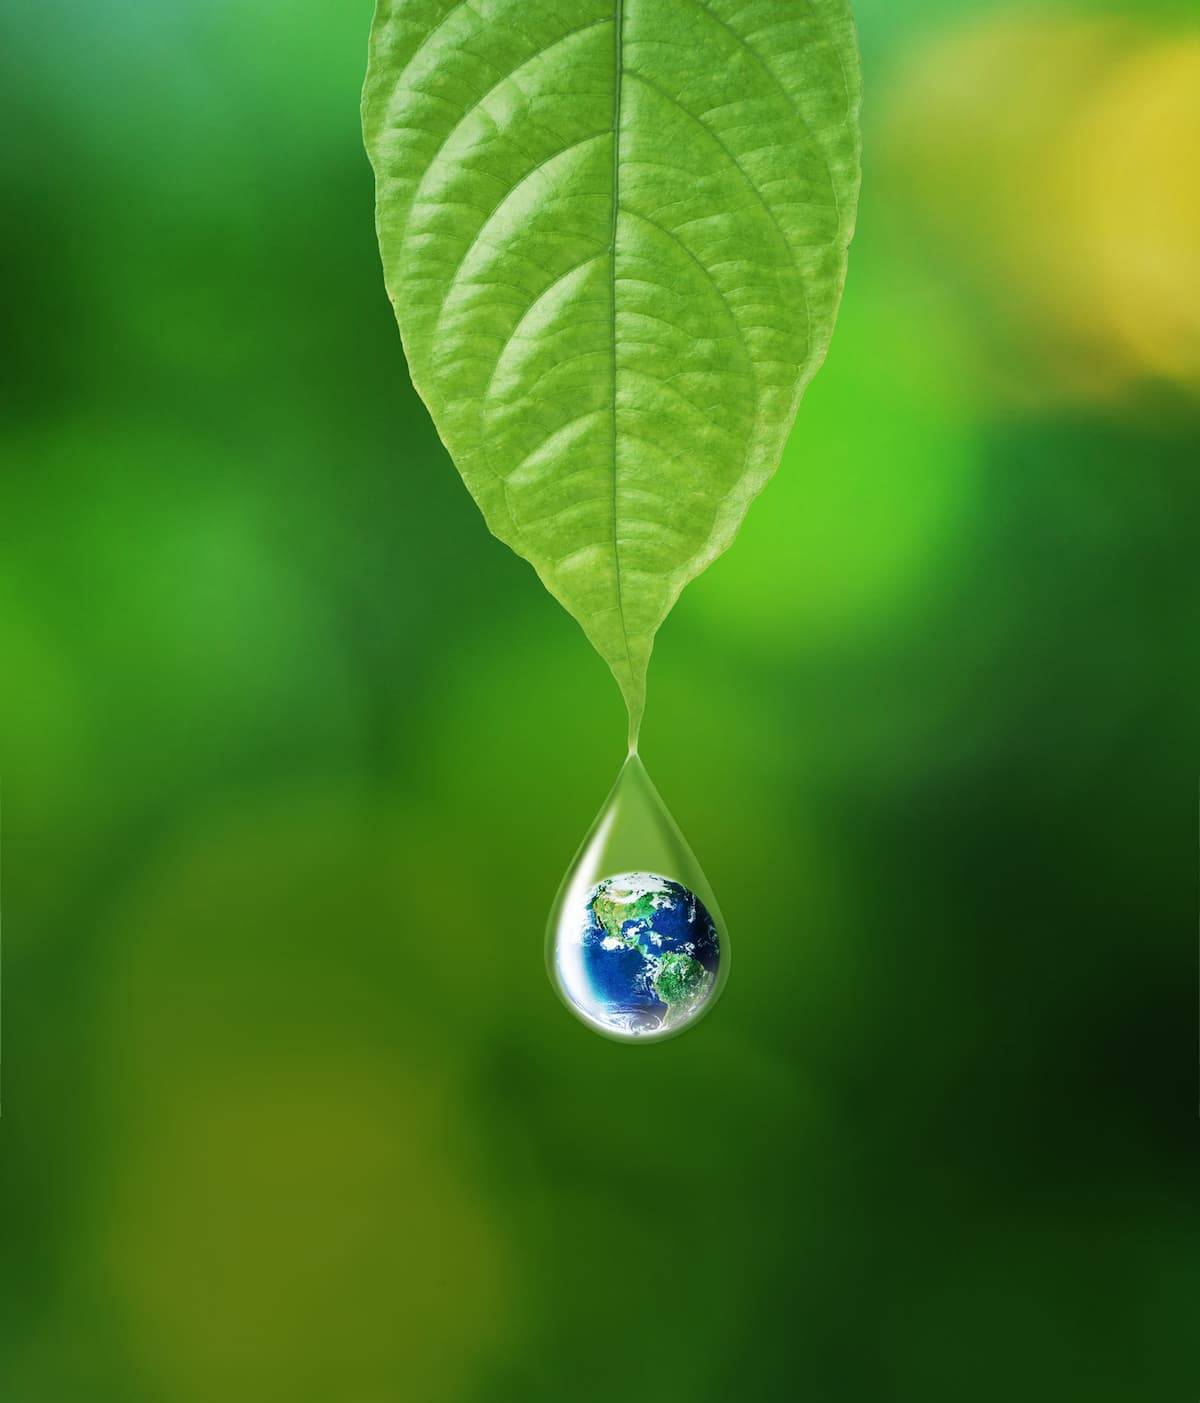 Leaf with water droplet containing the earth